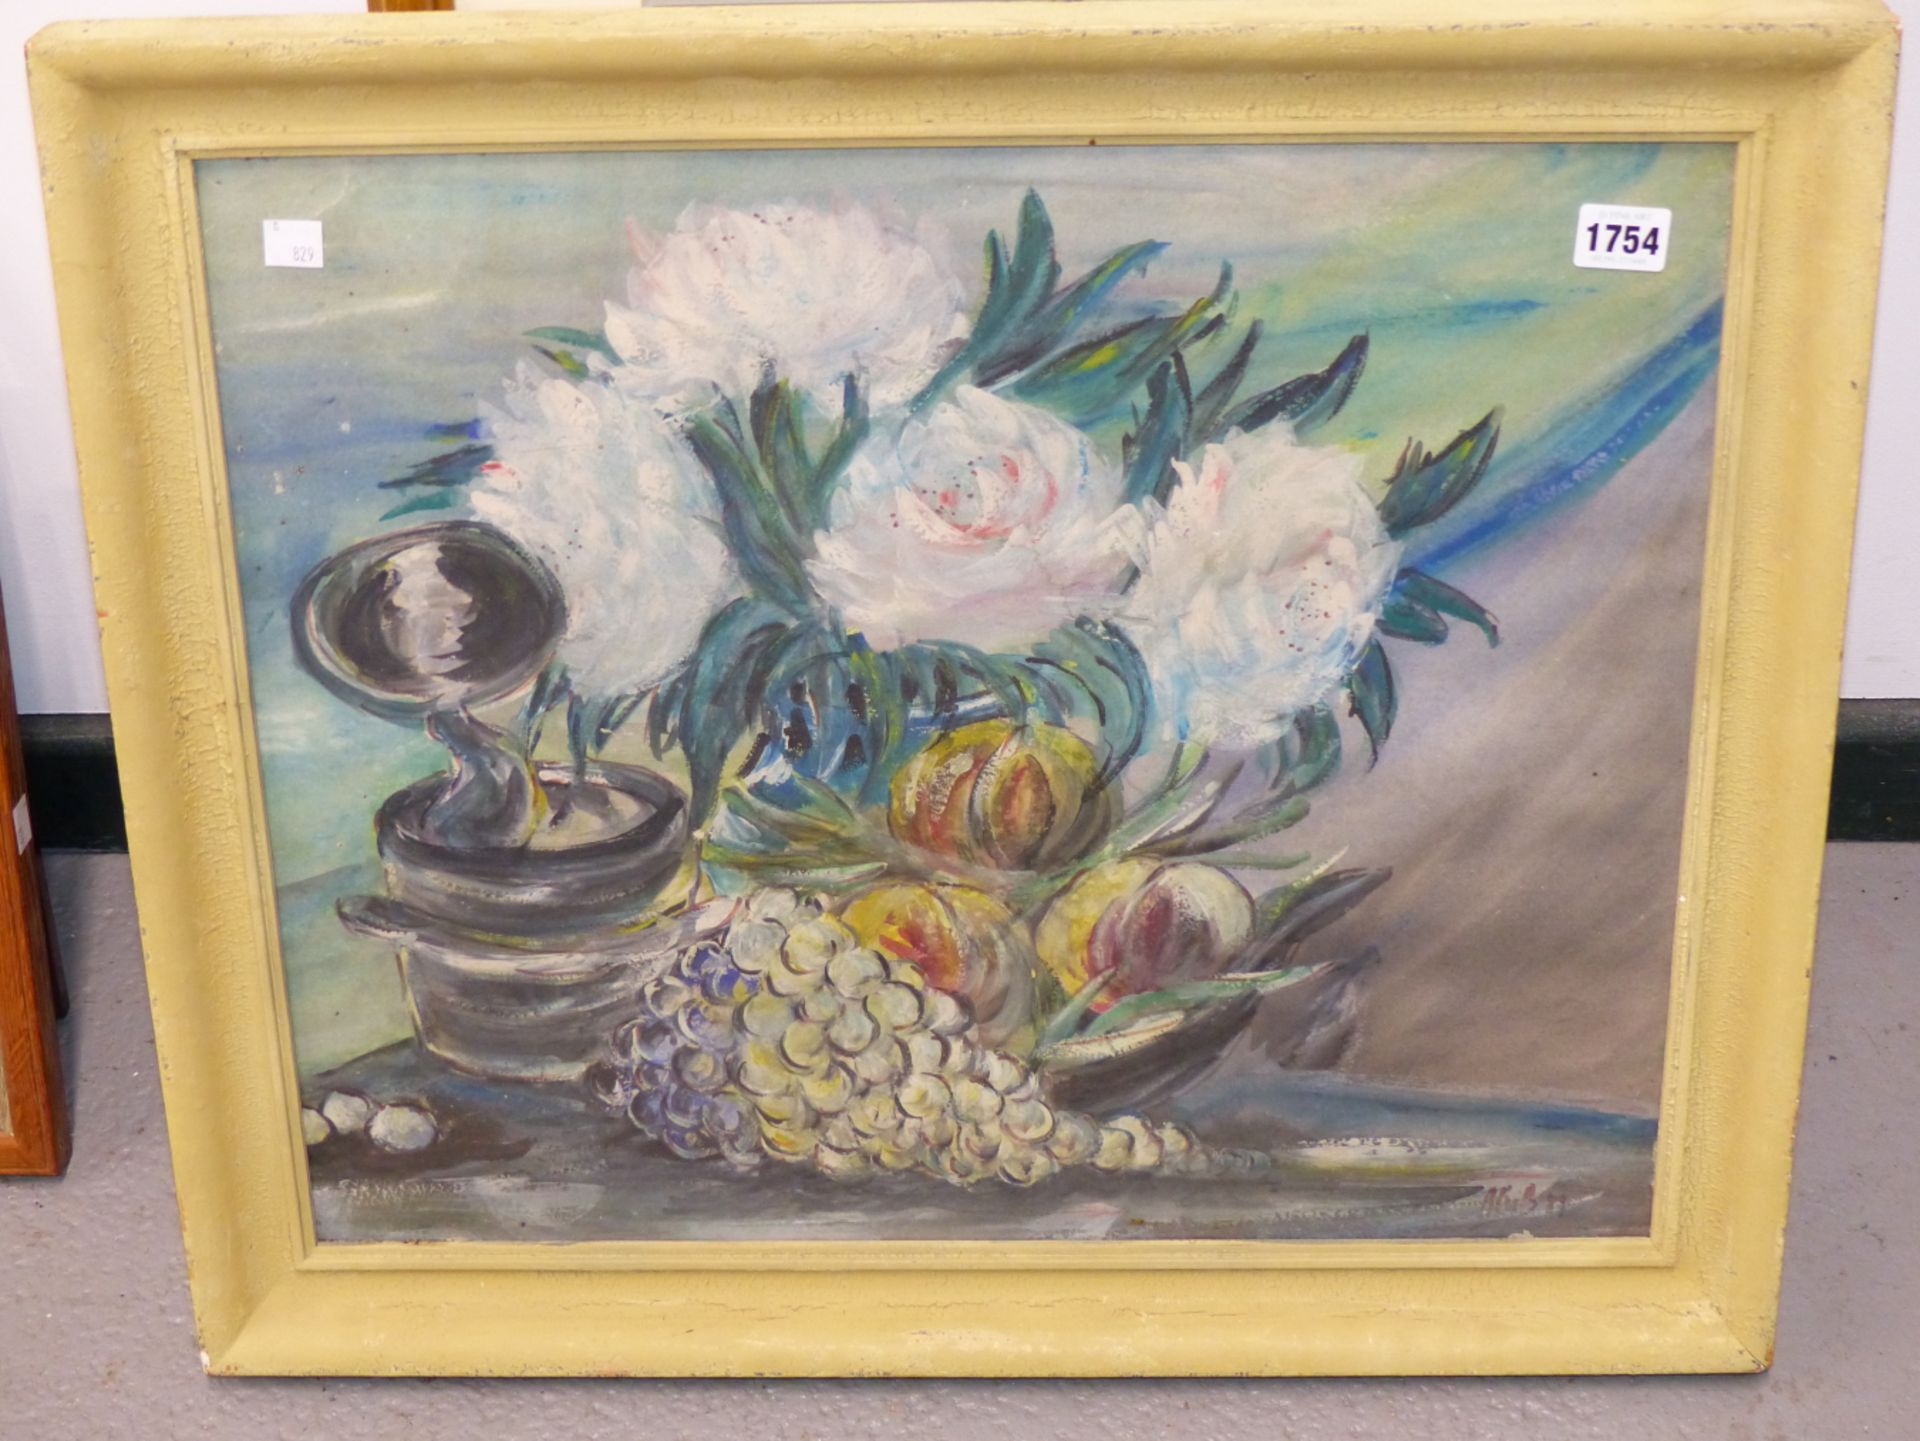 20TH C. CONTEMPORARY. MIDDLE EASTERN STILL LIFE WITH FRUIT AND FLOWERS, SIGNED INDISTINCTLY. GOUACHE - Image 2 of 4